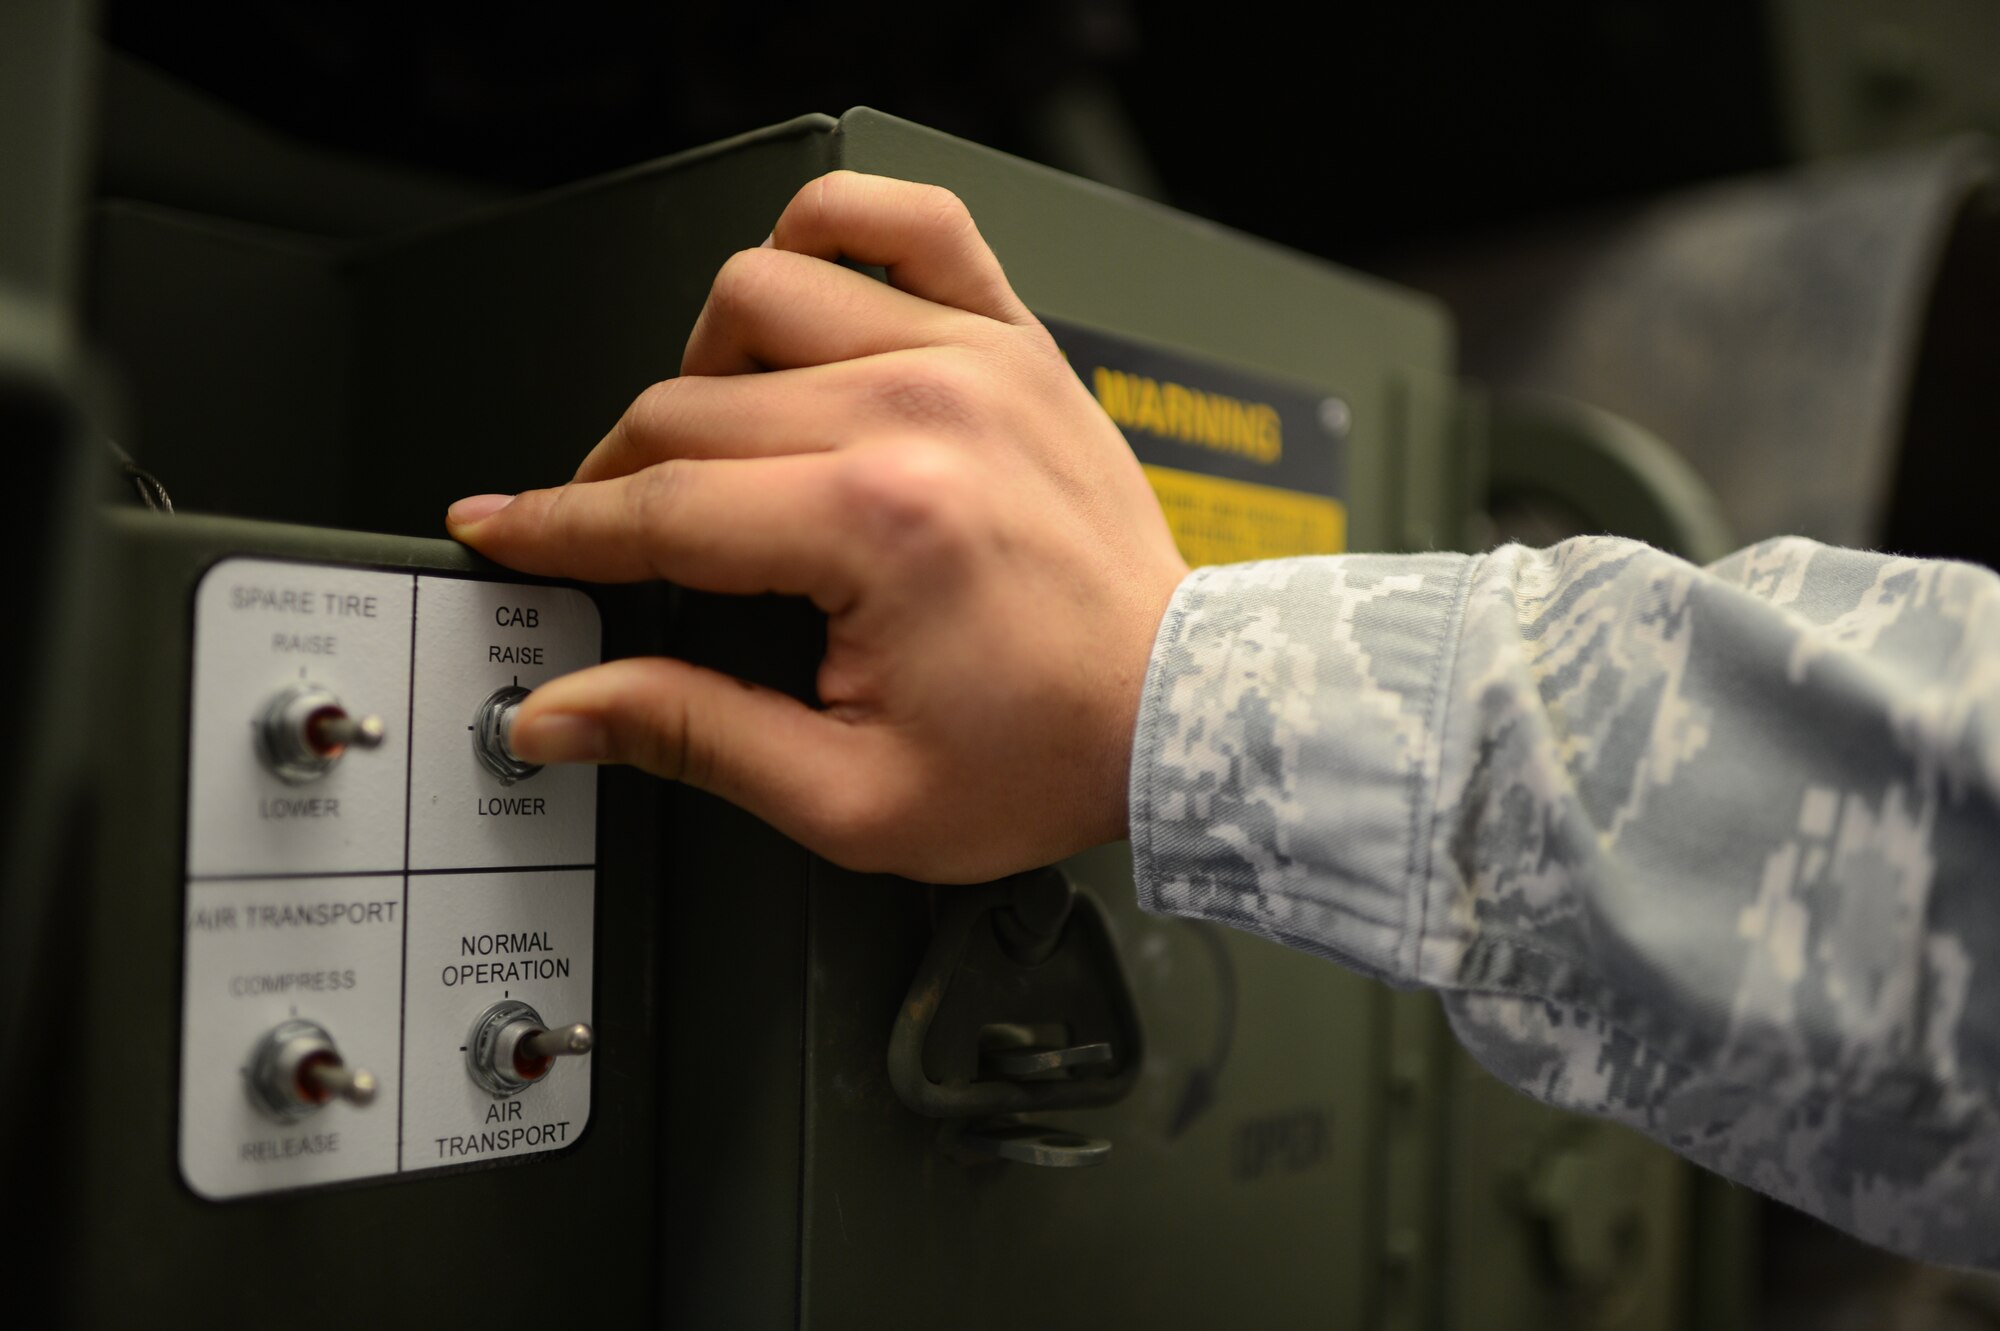 U.S. Air Force Airman 1st Class Evin Diaz, 606th Air Control Squadron vehicle maintenance technician from Guam, presses a lift button on a five-ton troop carrier vehicle on Spangdahlem Air Base, Germany, Feb. 20, 2014. The cab must be lifted to give maintenance technicians access to the vehicle’s engine components. (U.S. Air Force photo by Senior Airman Gustavo Castillo/Released)